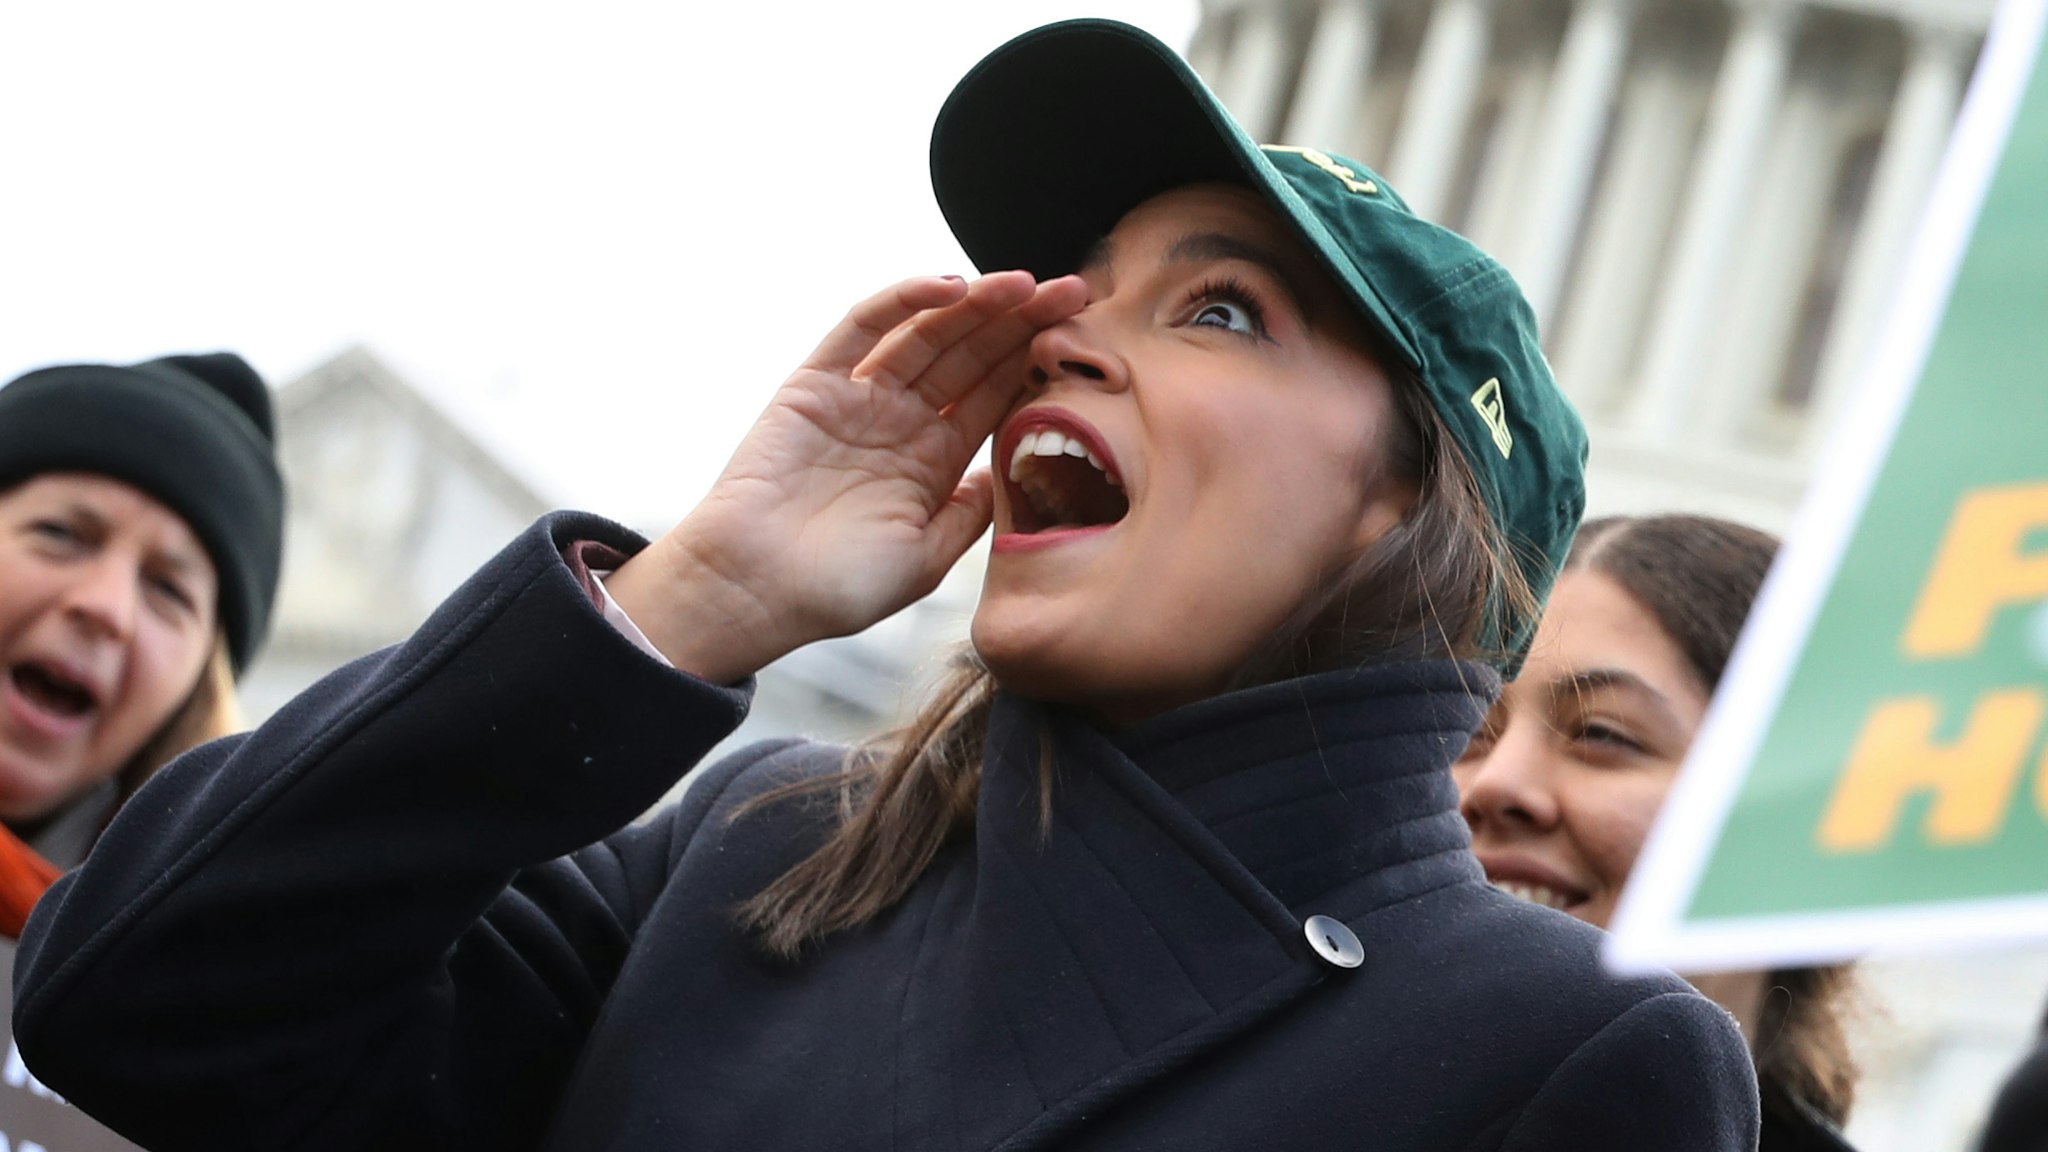 WASHINGTON, DC - NOVEMBER 14: Rep. Alexandria Ocasio-Cortez (D-NY) (2nd L) chants with housing and environmental advocates before a news conference to introduce legislation to transform public housing as part of her Green New Deal outside the U.S. Capitol November 14, 2019 in Washington, DC. The liberal legislators invited affordable housing advocates and climate change activists to join them for the announcement.